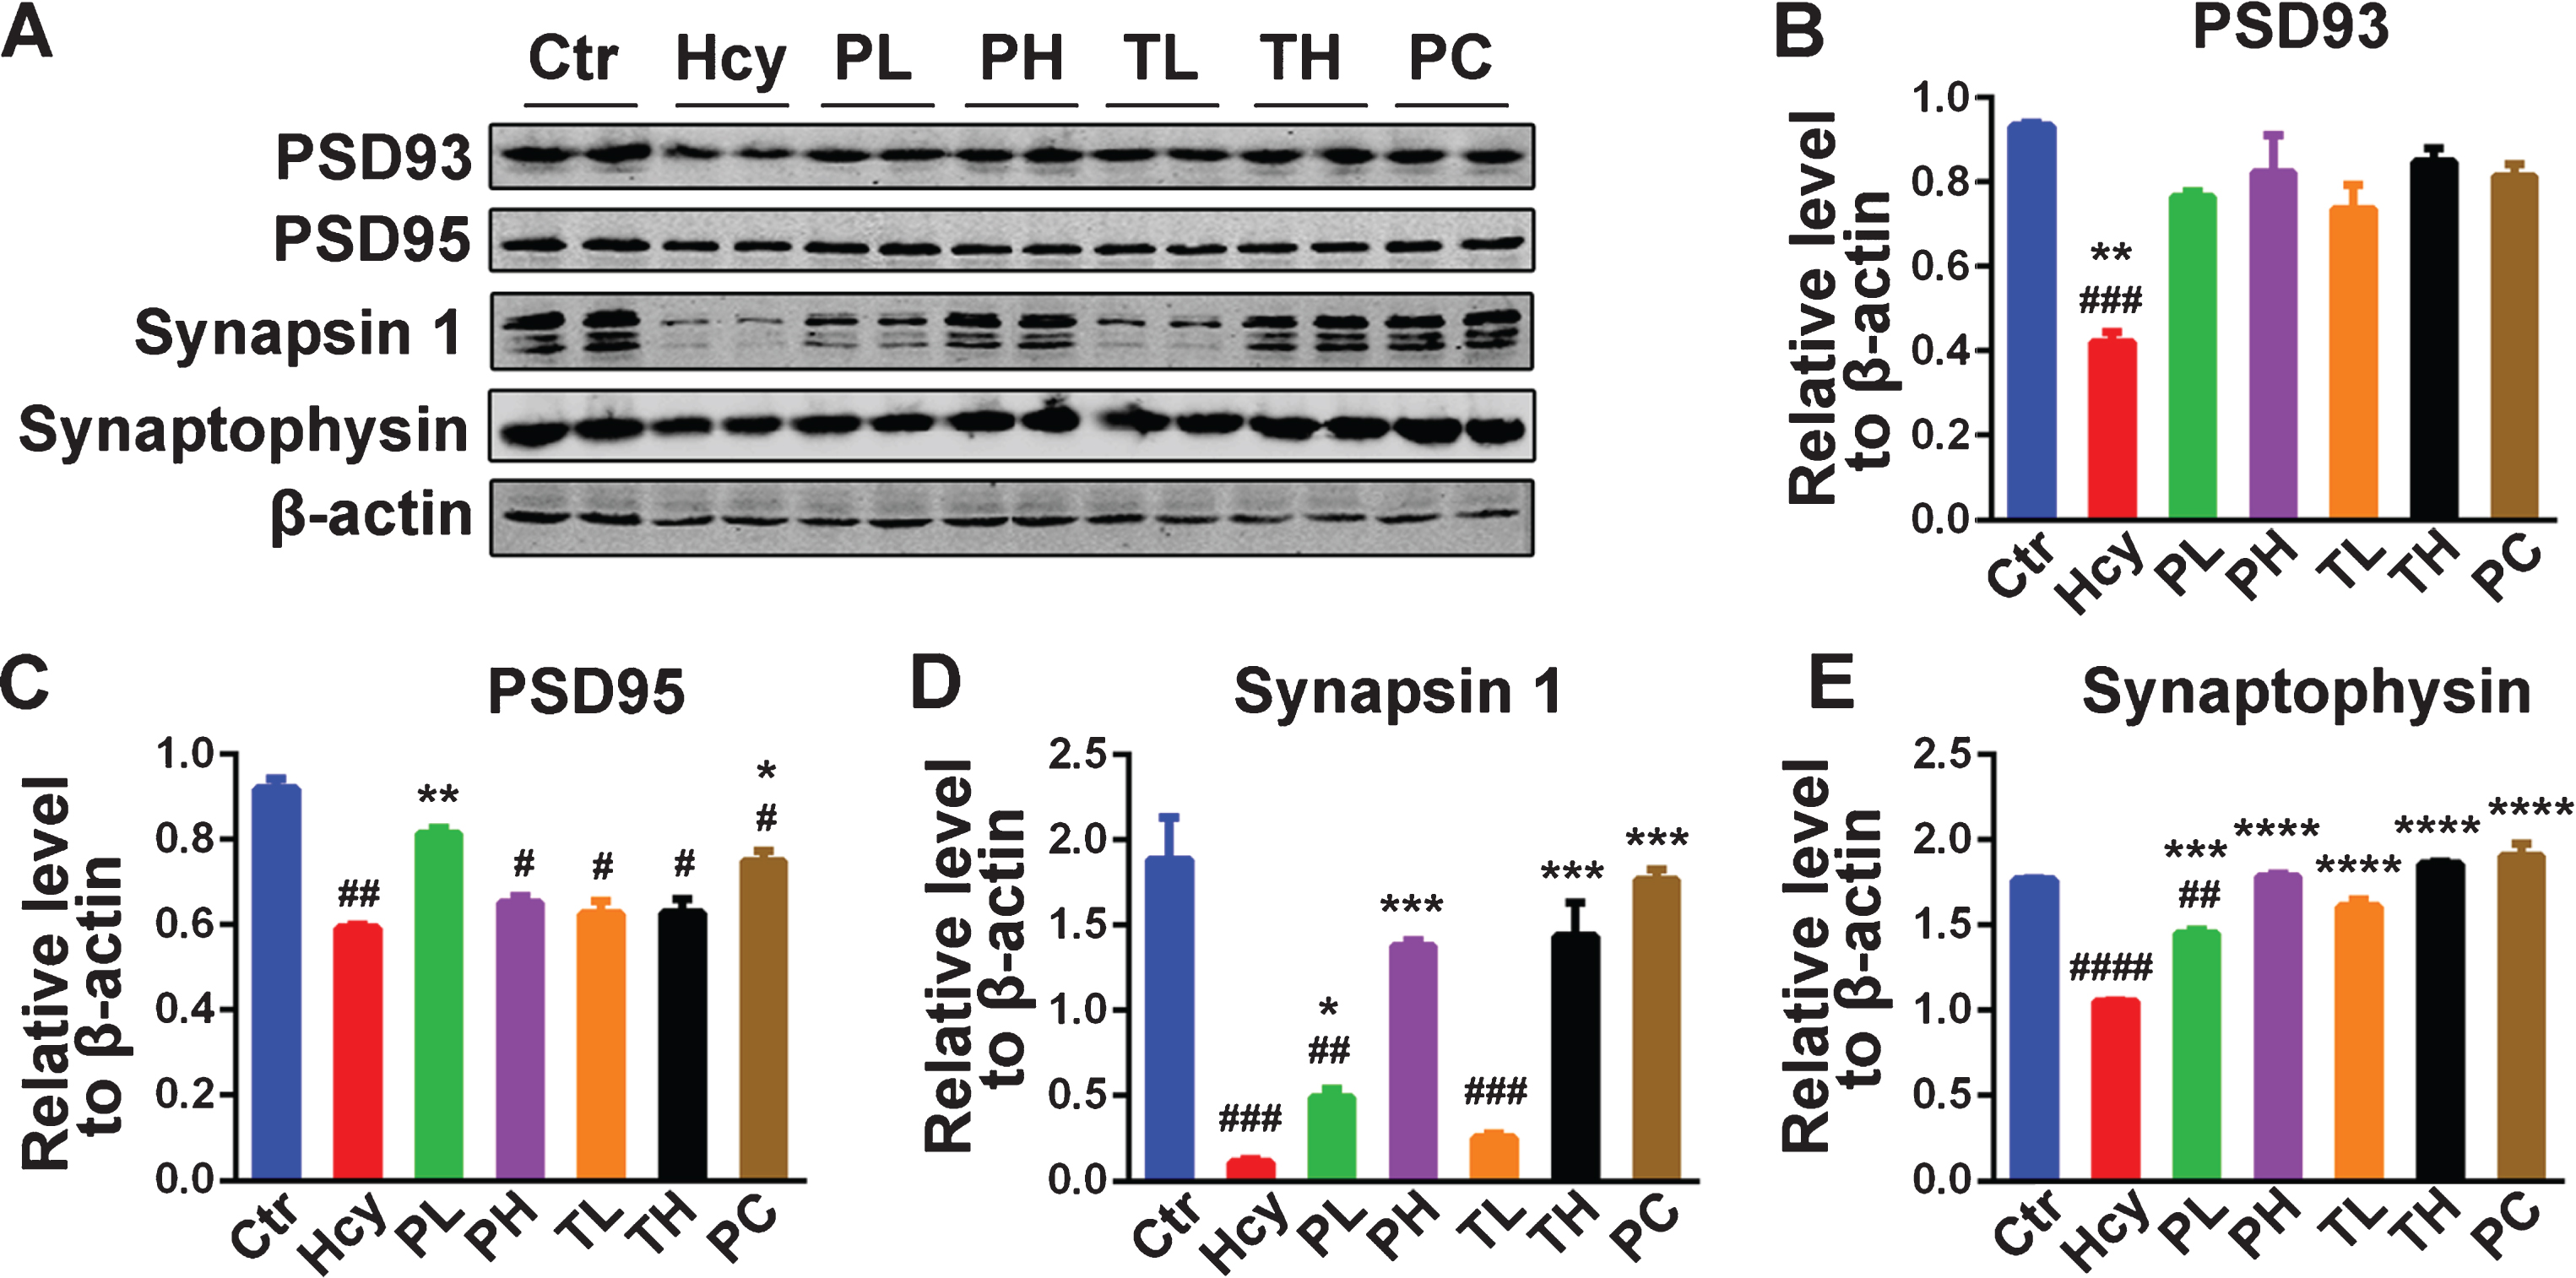 MO recovered memory-related proteins levels. A) Levels of PSD93, PSD95, Synapsin 1 and Synaptophysin were detected by western blotting in the hippocampus and β-actin was used as loading control. B-E) Quantitative analysis of the blots showed that Hcy dramatically decreased the expression of these synaptic proteins in the hippocampus and either preventive or curative treatment with MO reversed these effects. The data were expressed as mean±SD (n = 6). #p < 0.05, # #p < 0.01, # # #p < 0.001, # # # #p < 0.0001 versus control; *p < 0.05, **p < 0.01, ***p < 0.001, ****p < 0.0001 versus Hcy.